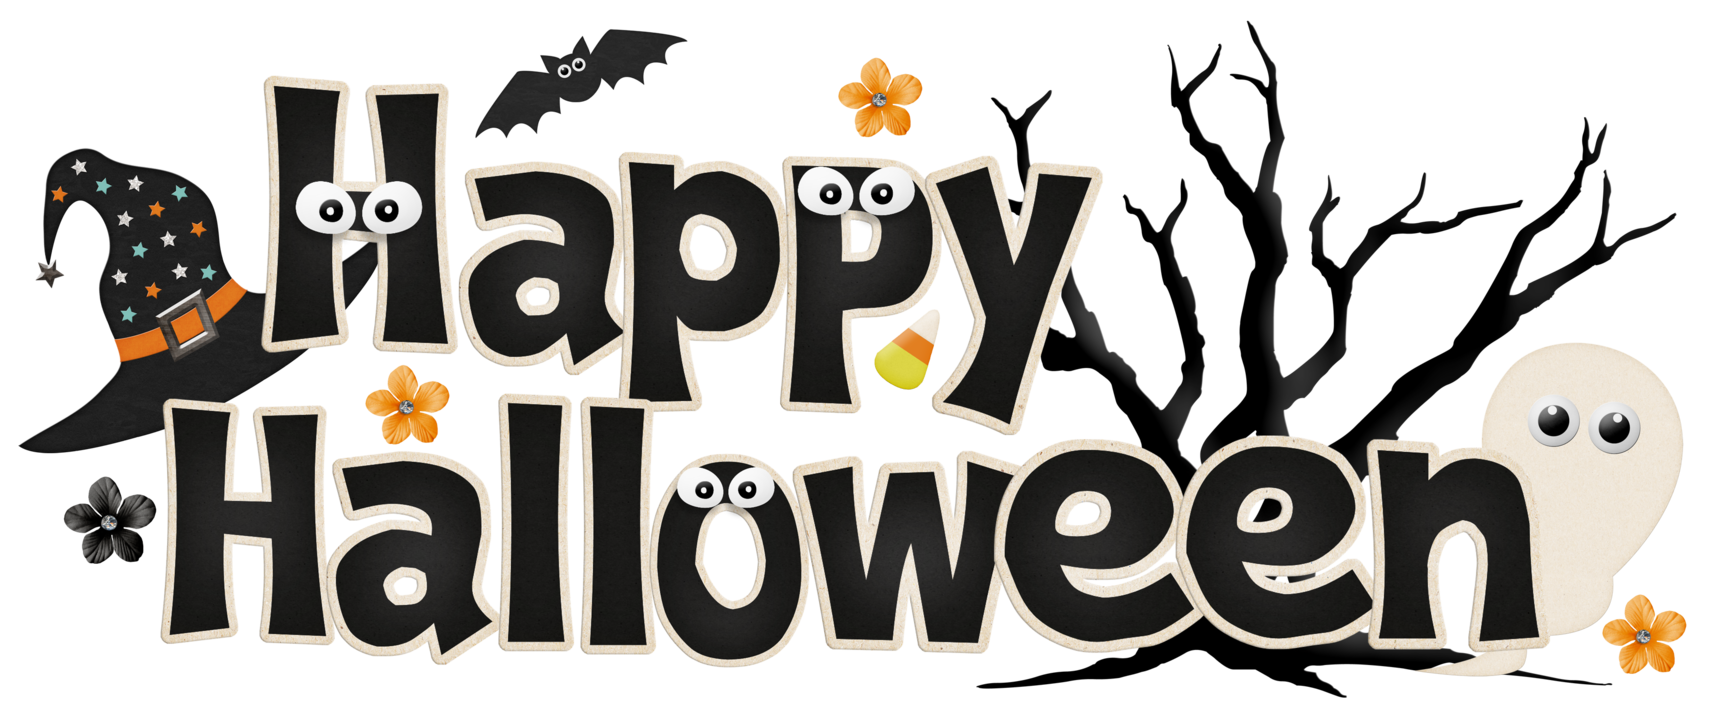 halloween free clipart images - photo #24